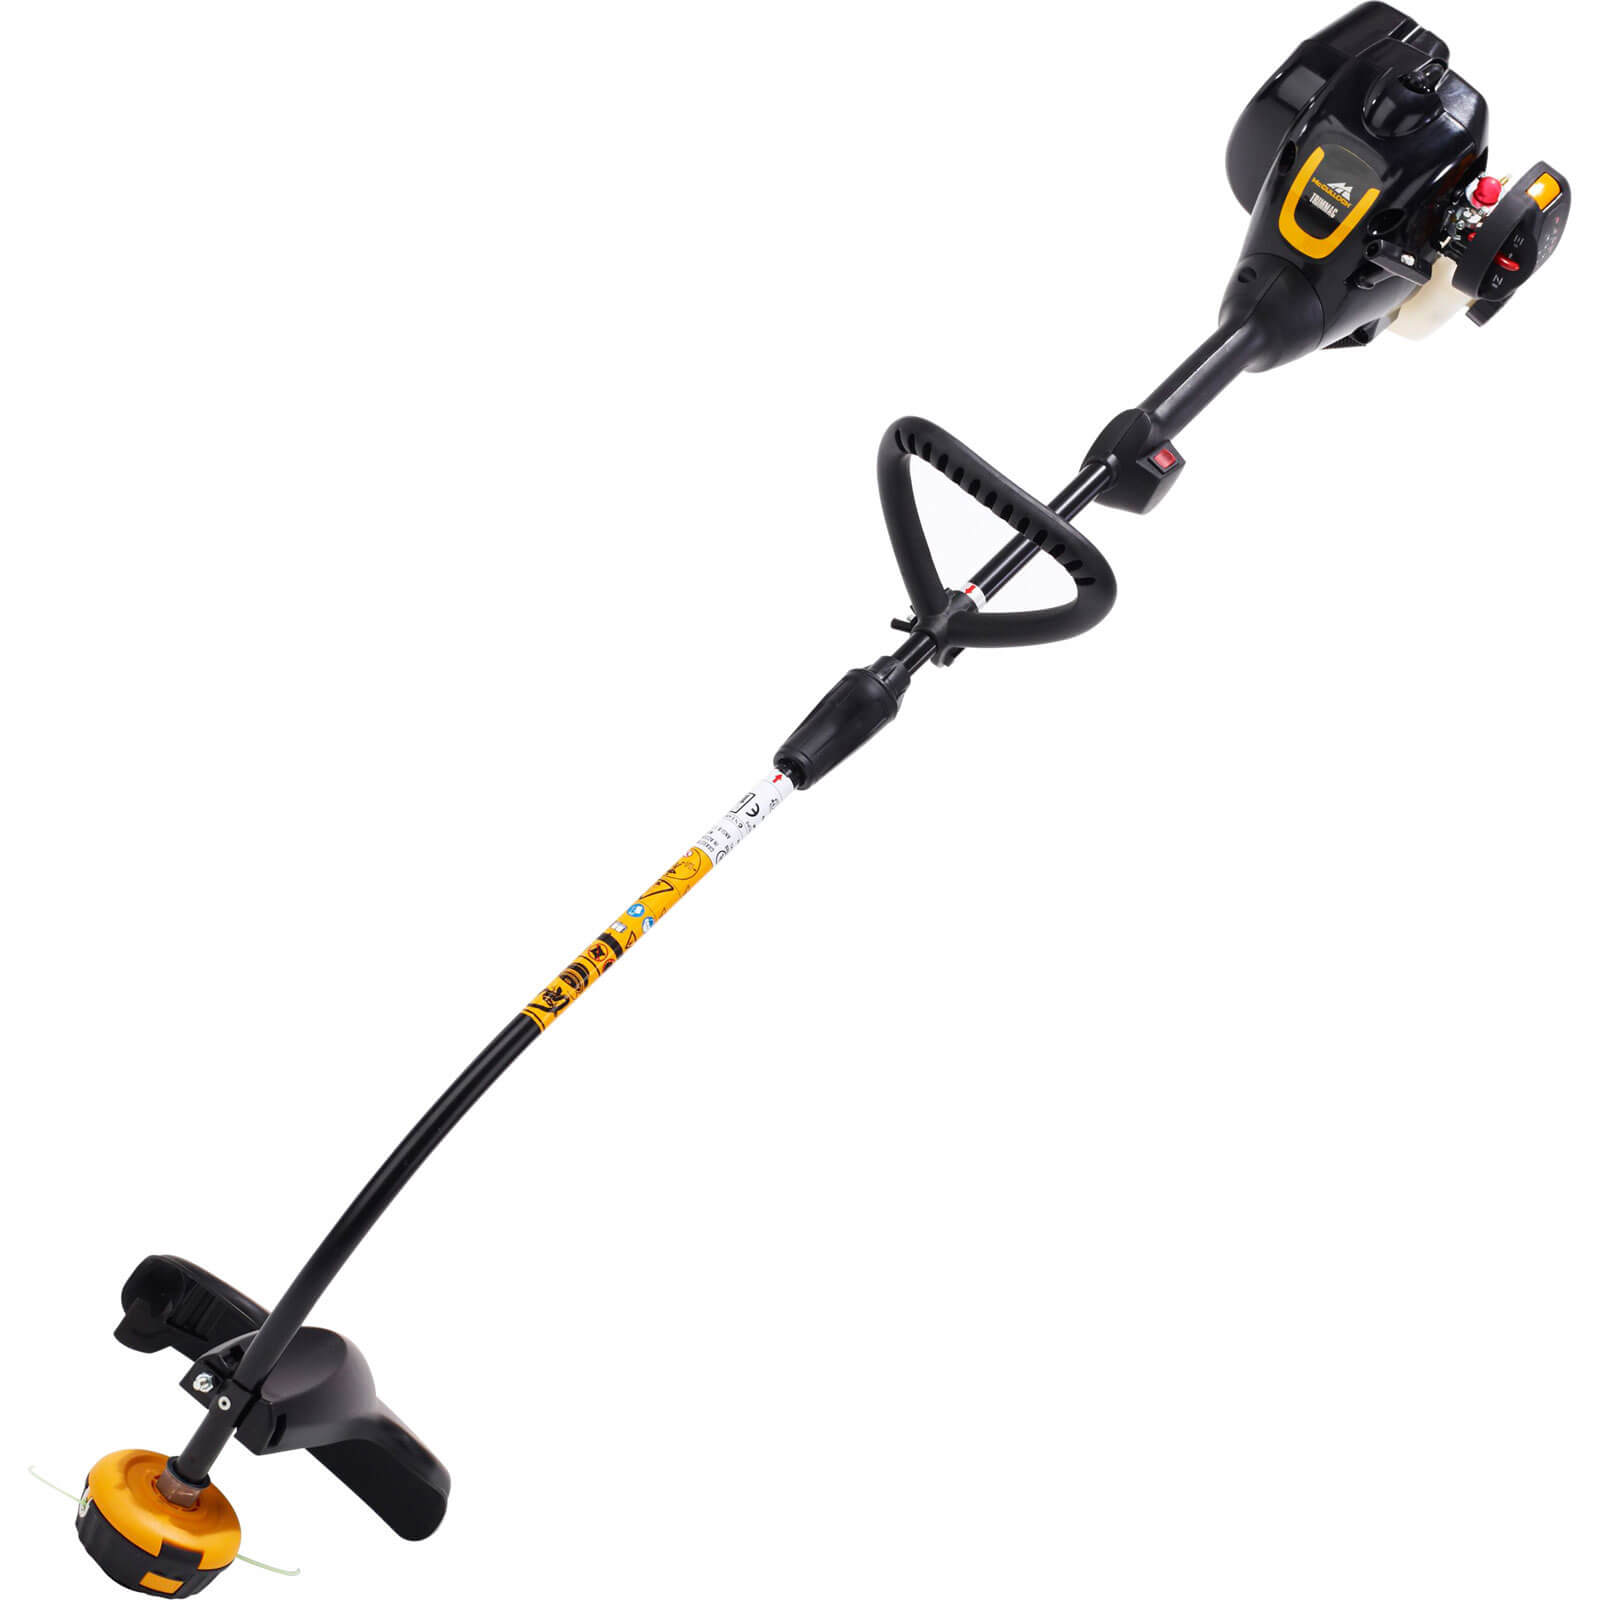 Image of McCulloch TRIMMAC Petrol Grass Trimmer 410mm